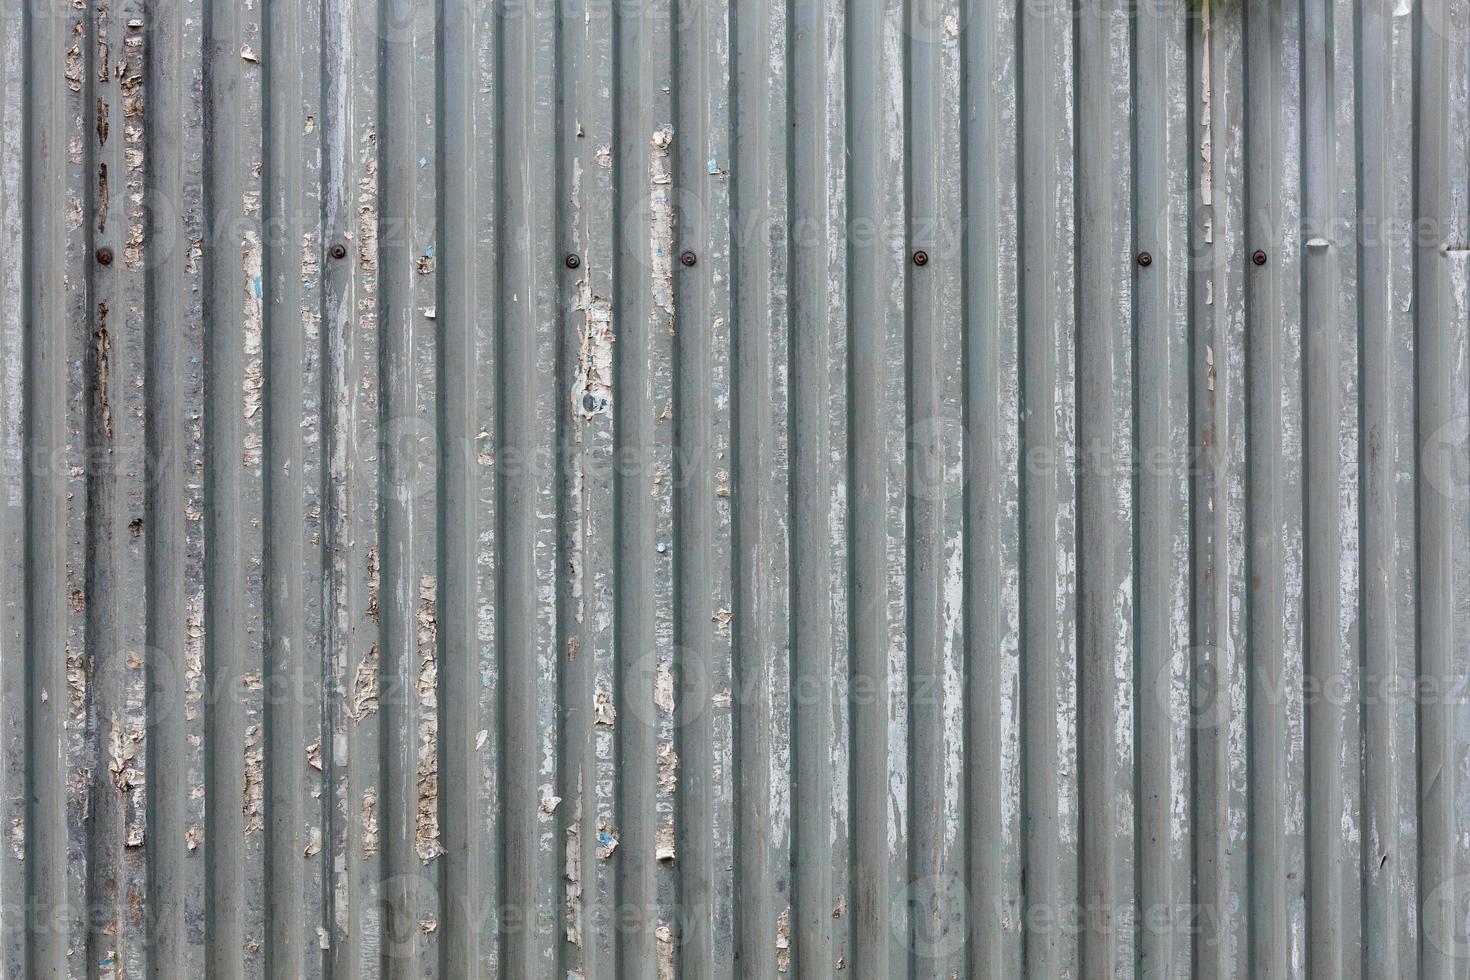 corrugated zinc-plated sheet fence with paper advertisements leftovers photo